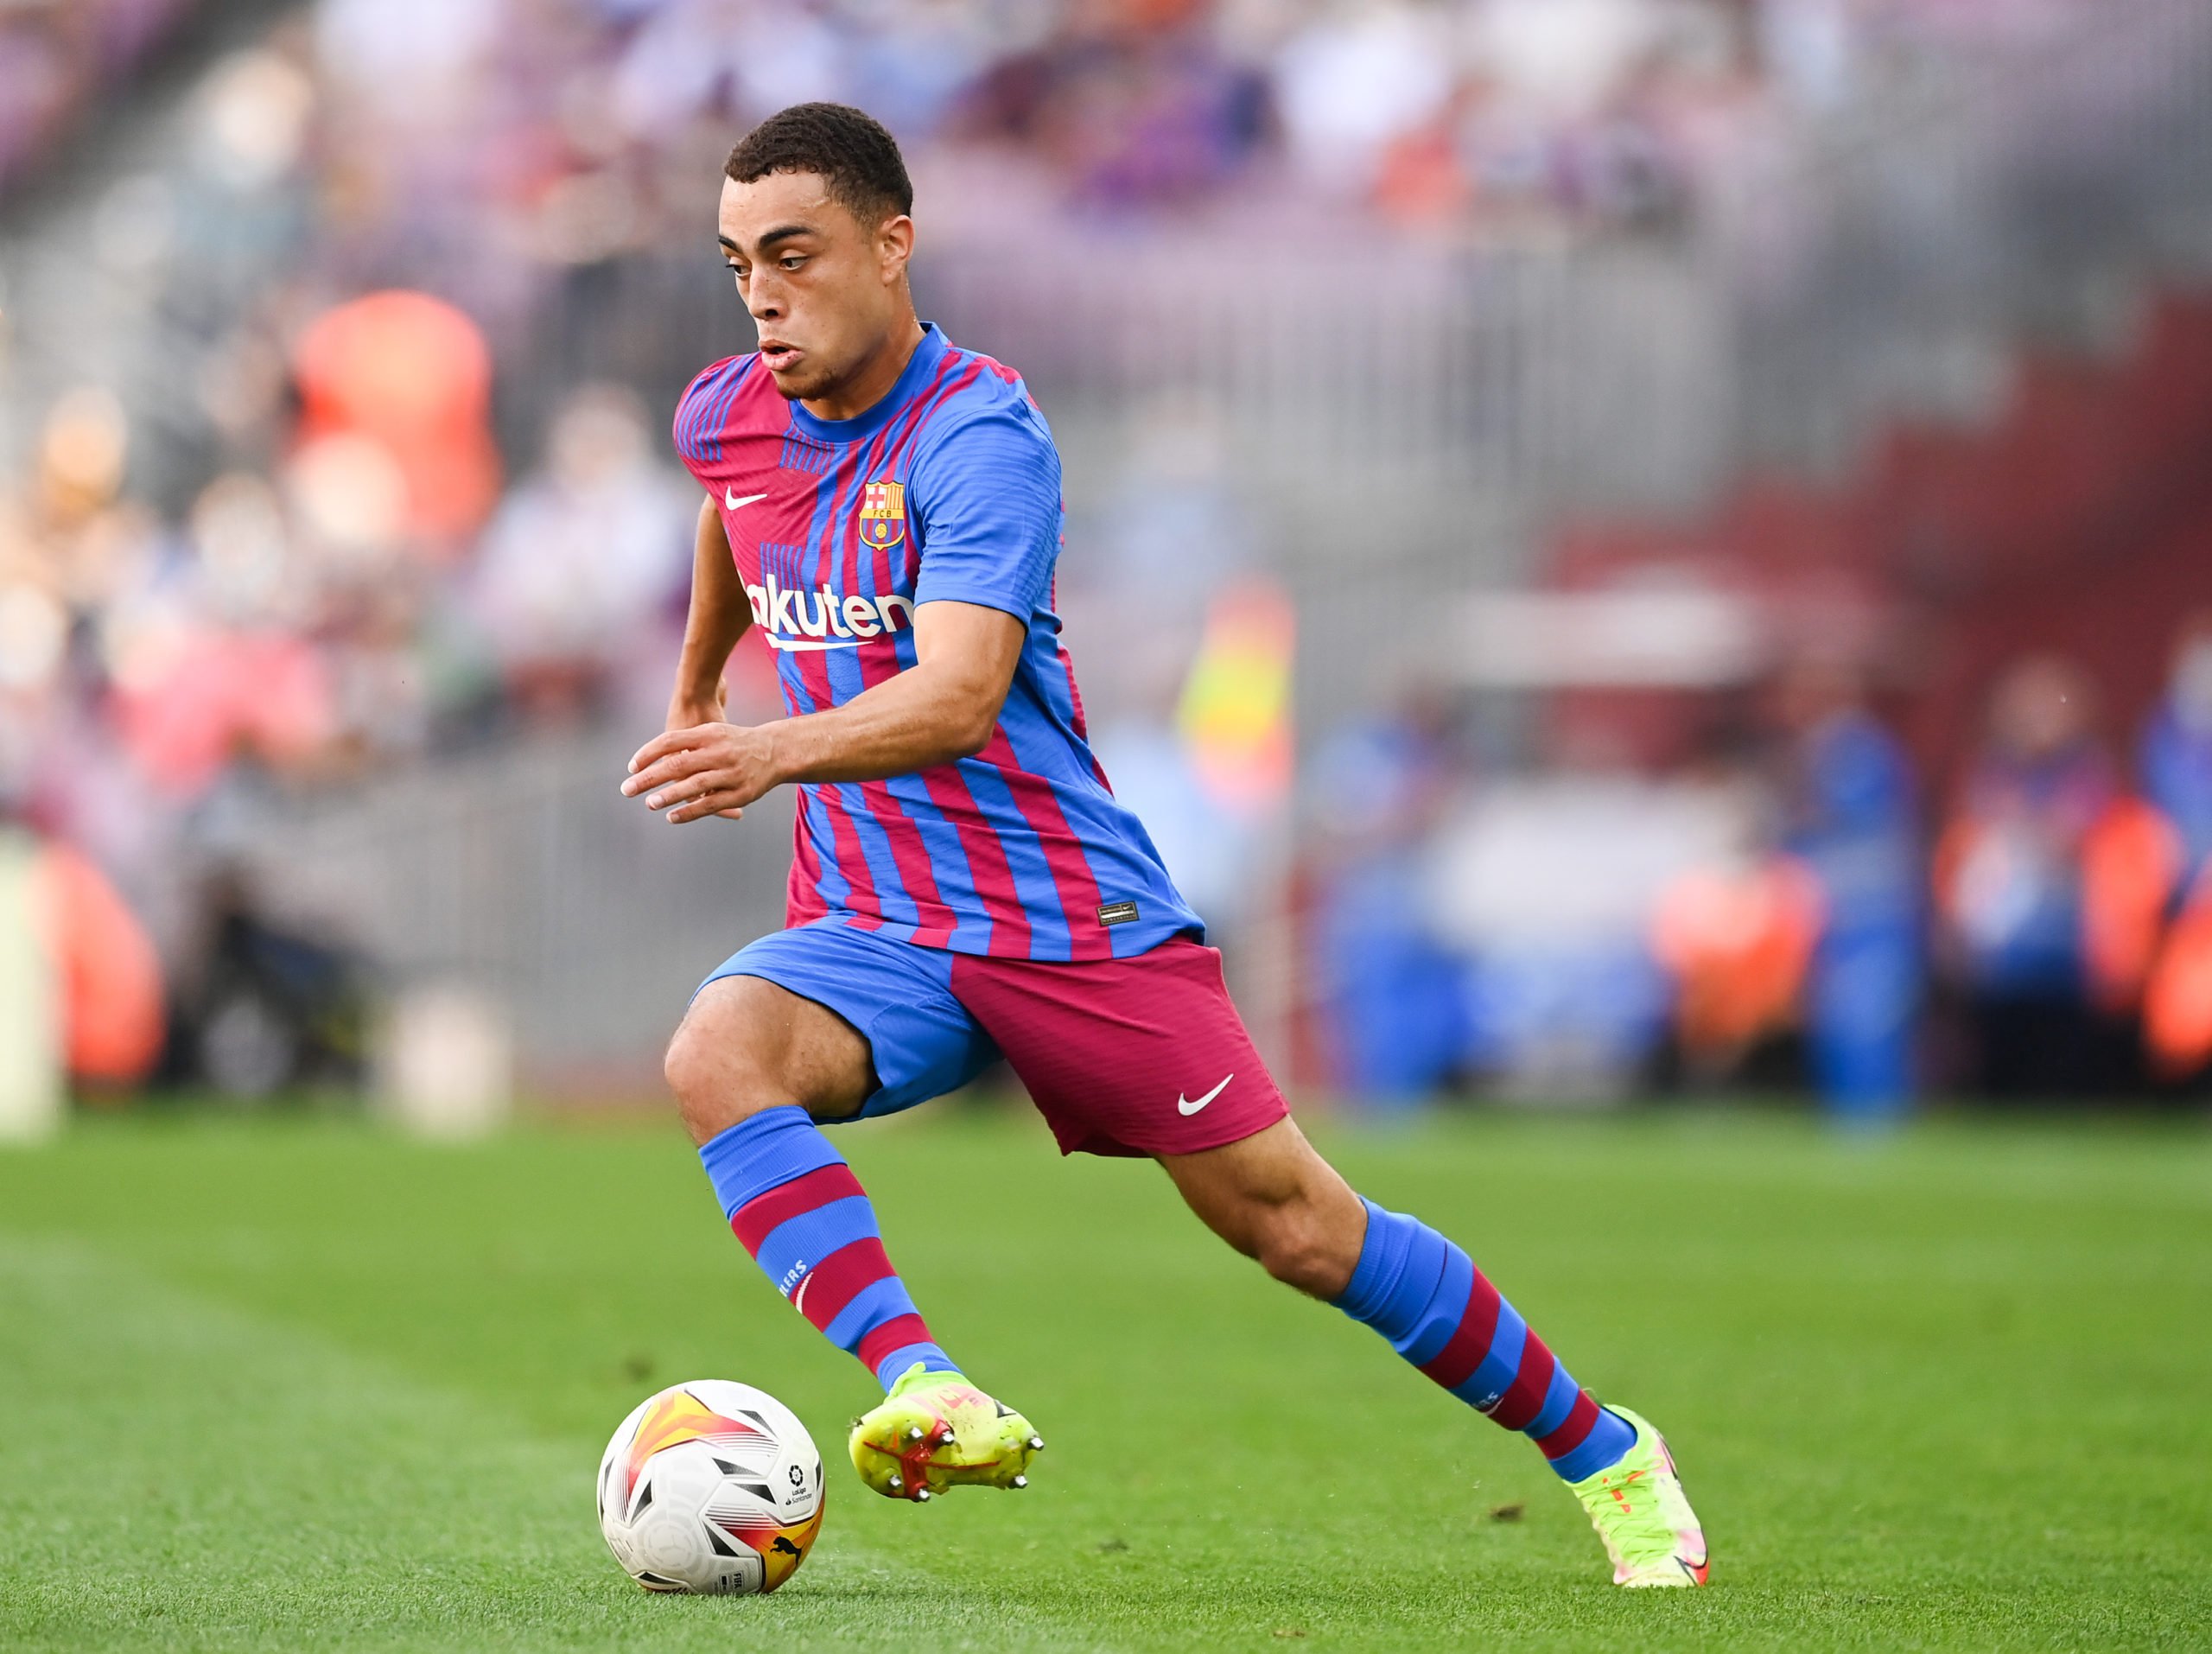 BARCELONA, SPAIN - SEPTEMBER 26: Sergiño Dest of FC Barcelona runs with the ball during the LaLiga Santander match between FC Barcelona and Levante UD at Camp Nou on September 26, 2021 in Barcelona, Spain. (Photo by David Ramos/Getty Images)The 4th Official uses images provided by the following image agency:
Getty Images (https://www.gettyimages.de/)
Imago Images (https://www.imago-images.de/)